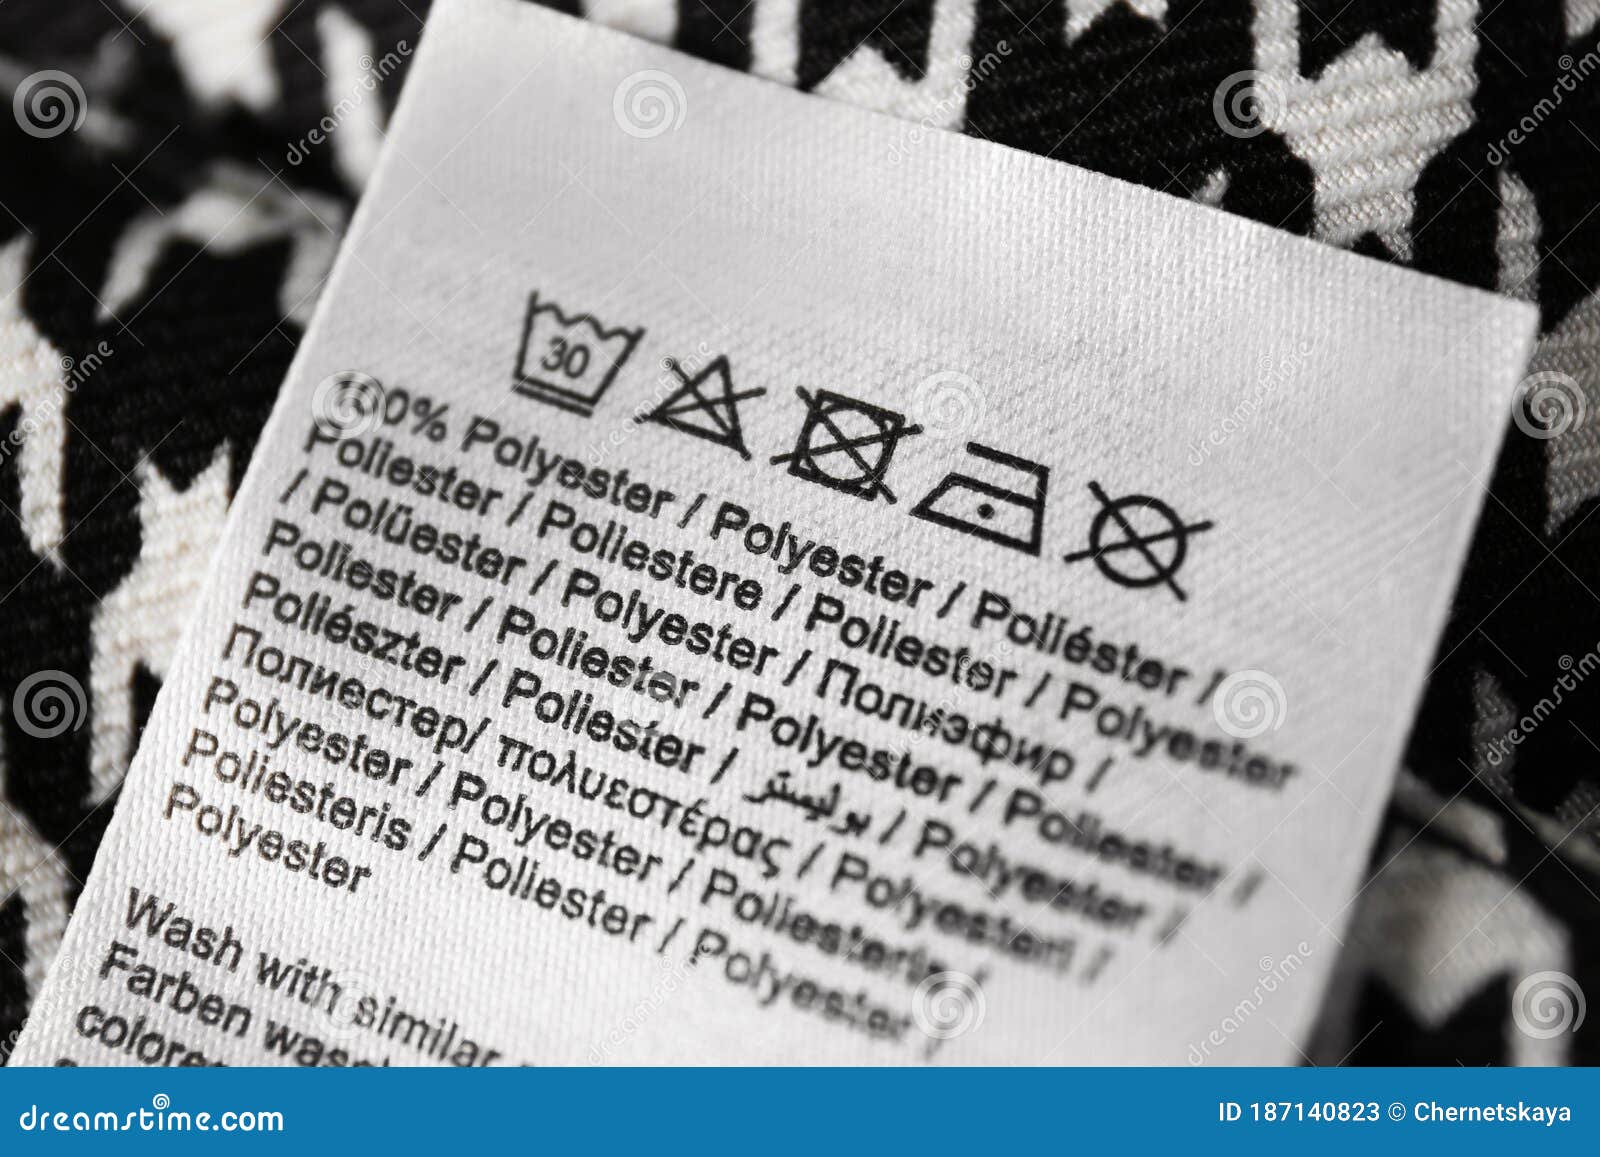 Clothing Label with Care Symbols and Material Content on Shirt, Closeup ...